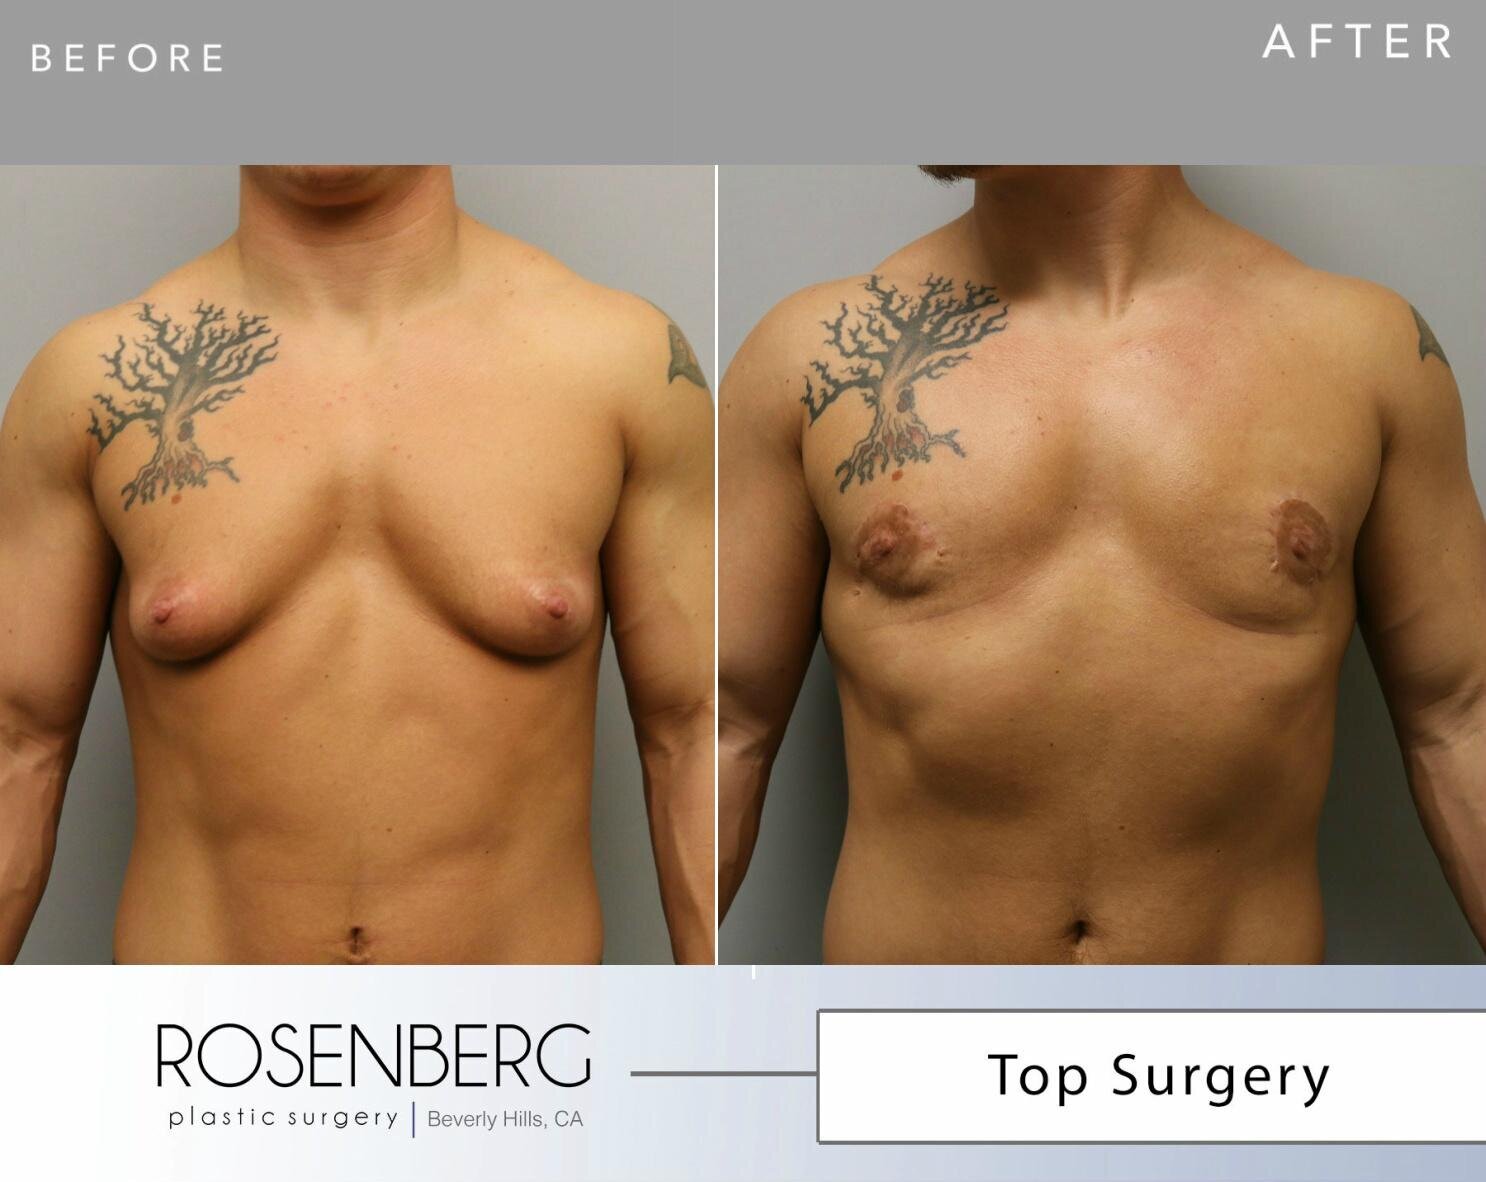 Top Surgery Results